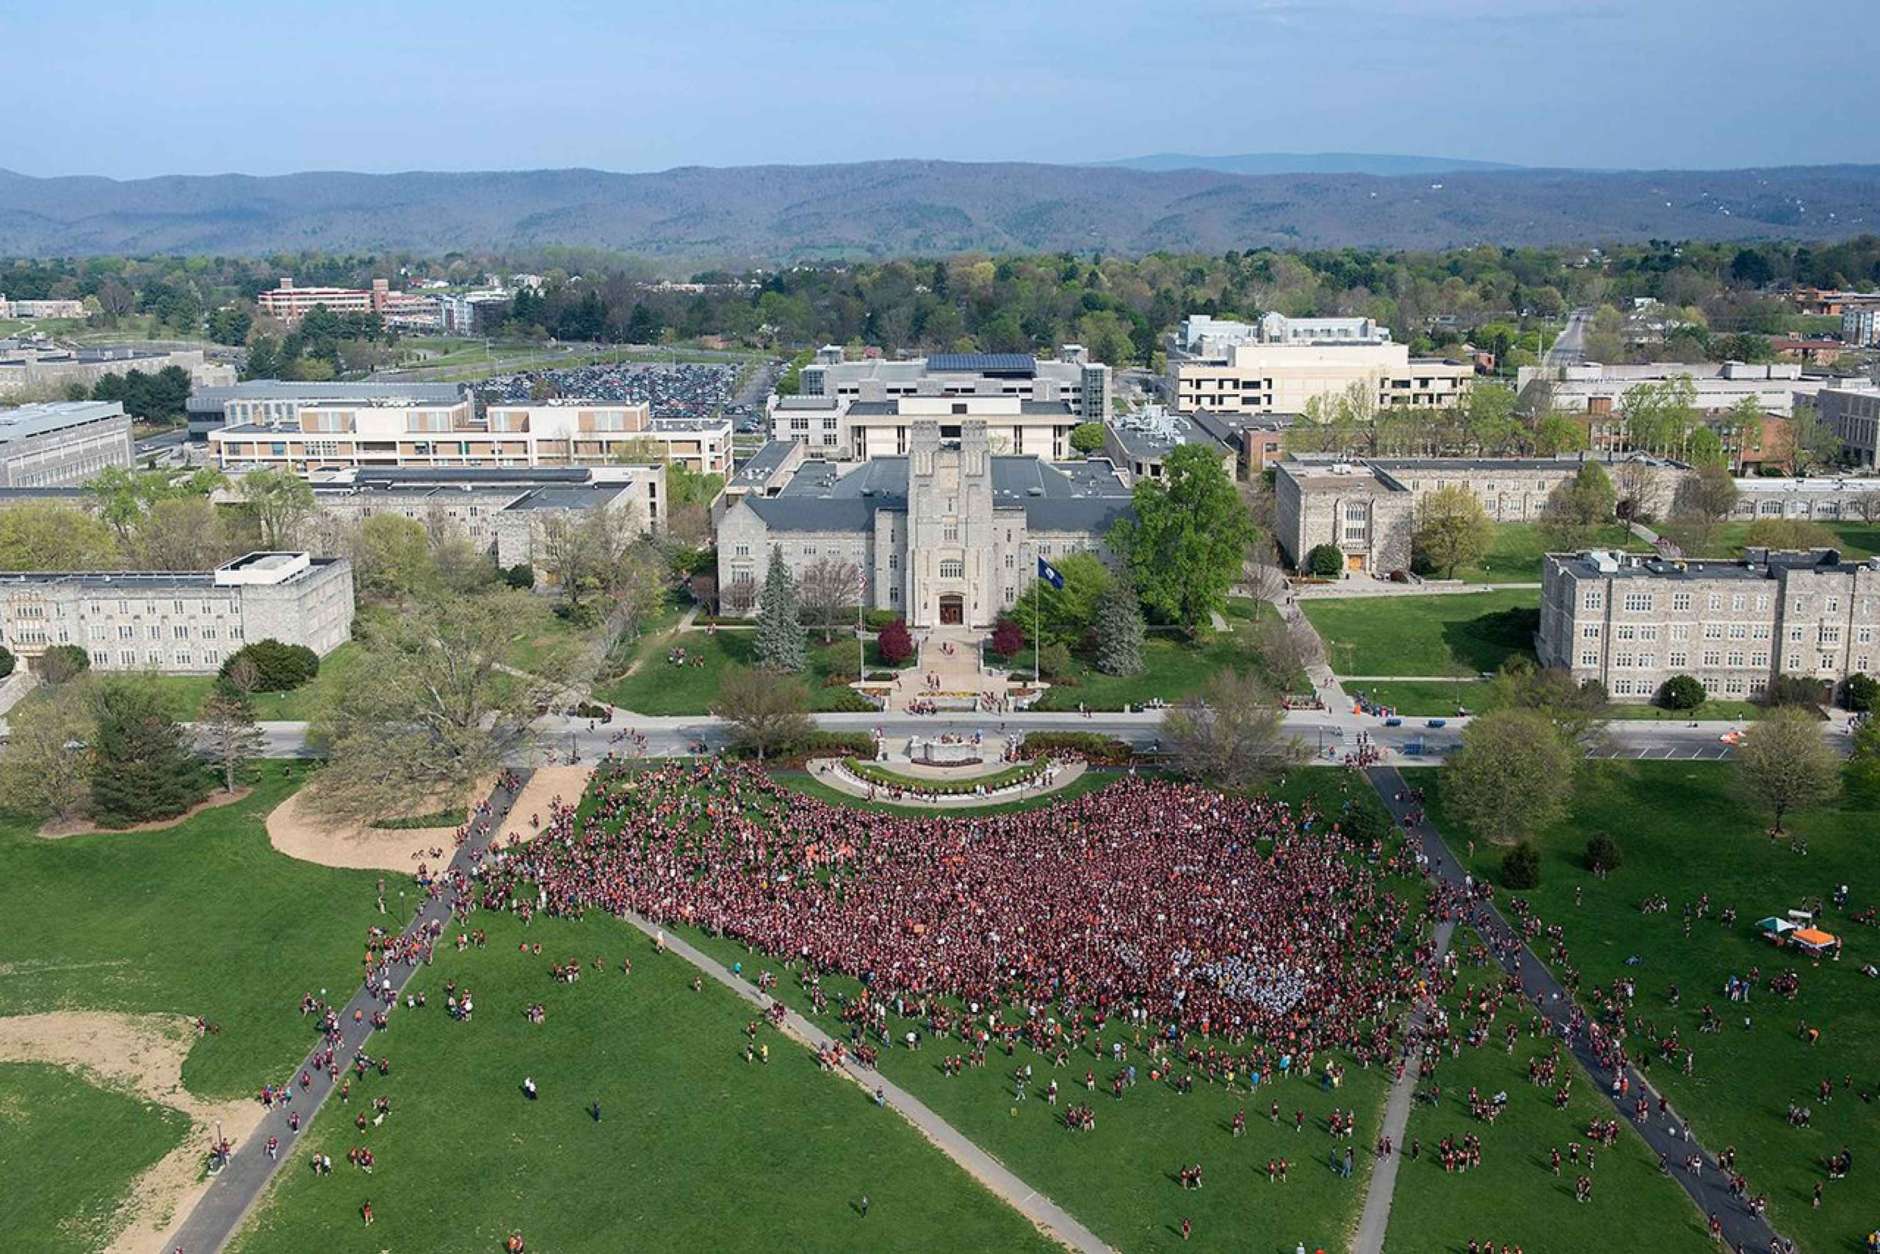 Participants in the 3.2-Mile Run in Remembrance gather at the April 16 Memorial after finishing the race on Saturday, April 15, 2017. (Courtesy Virginia Tech)